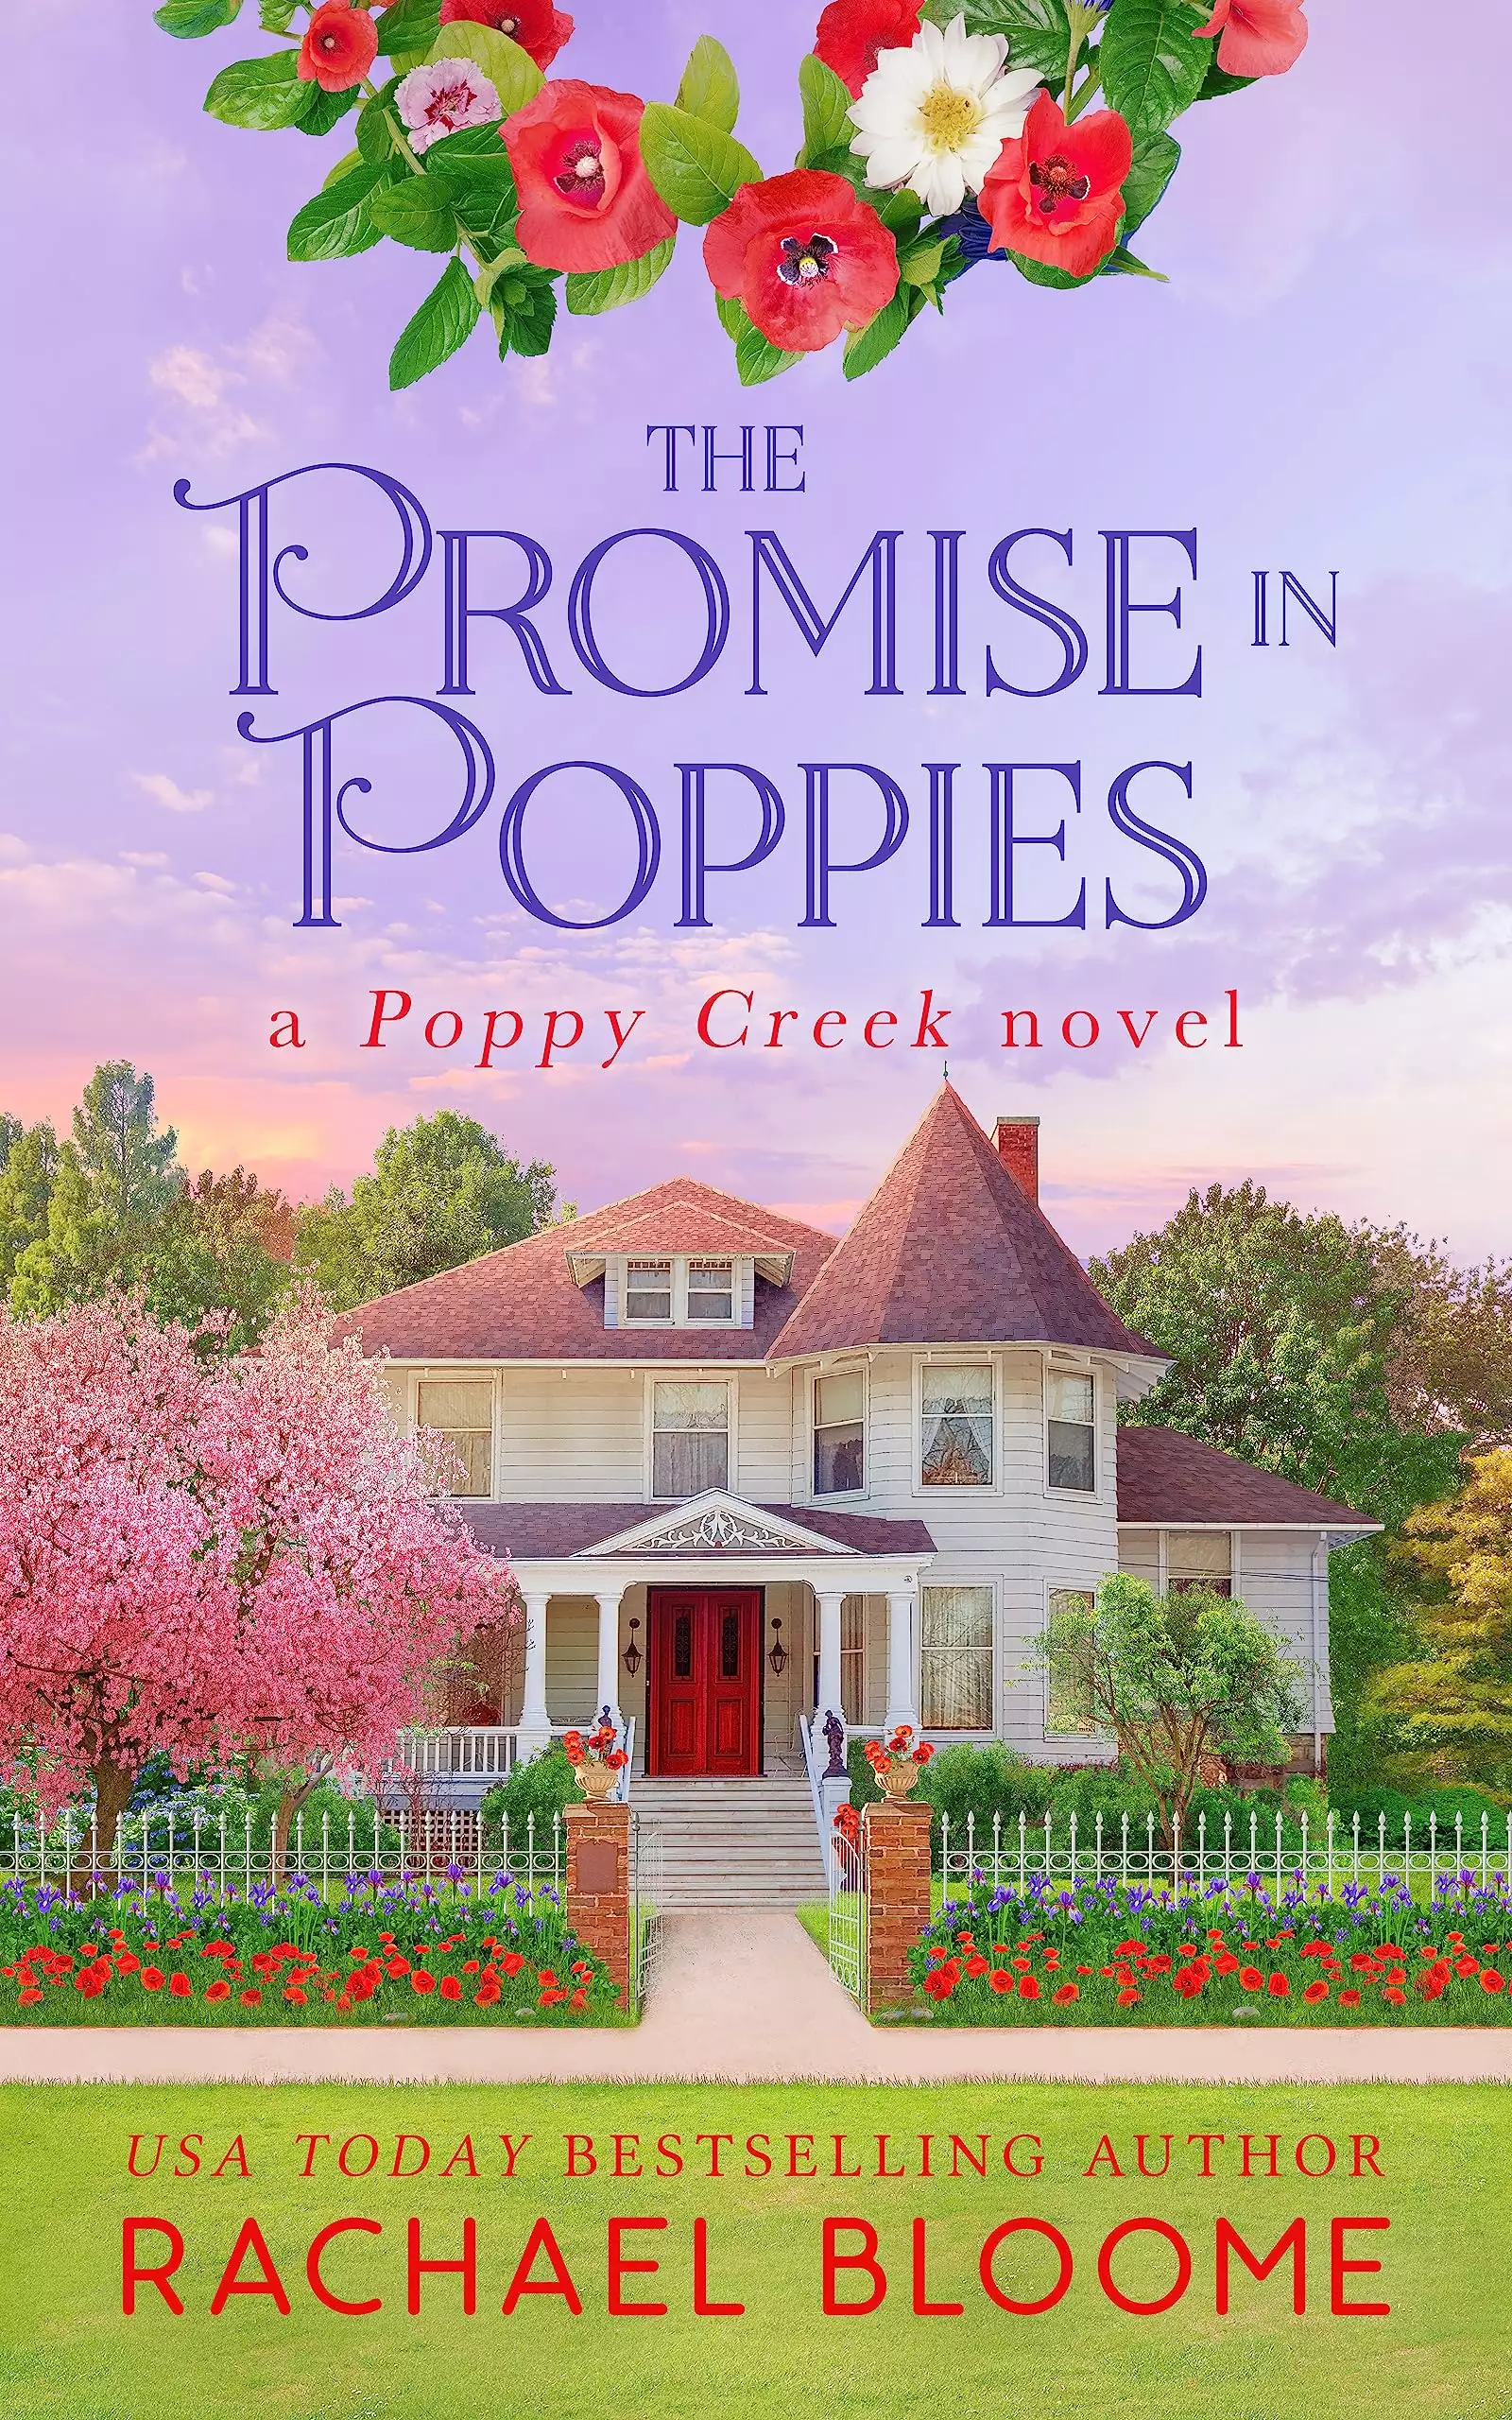 The Promise in Poppies: A Poppy Creek Novel